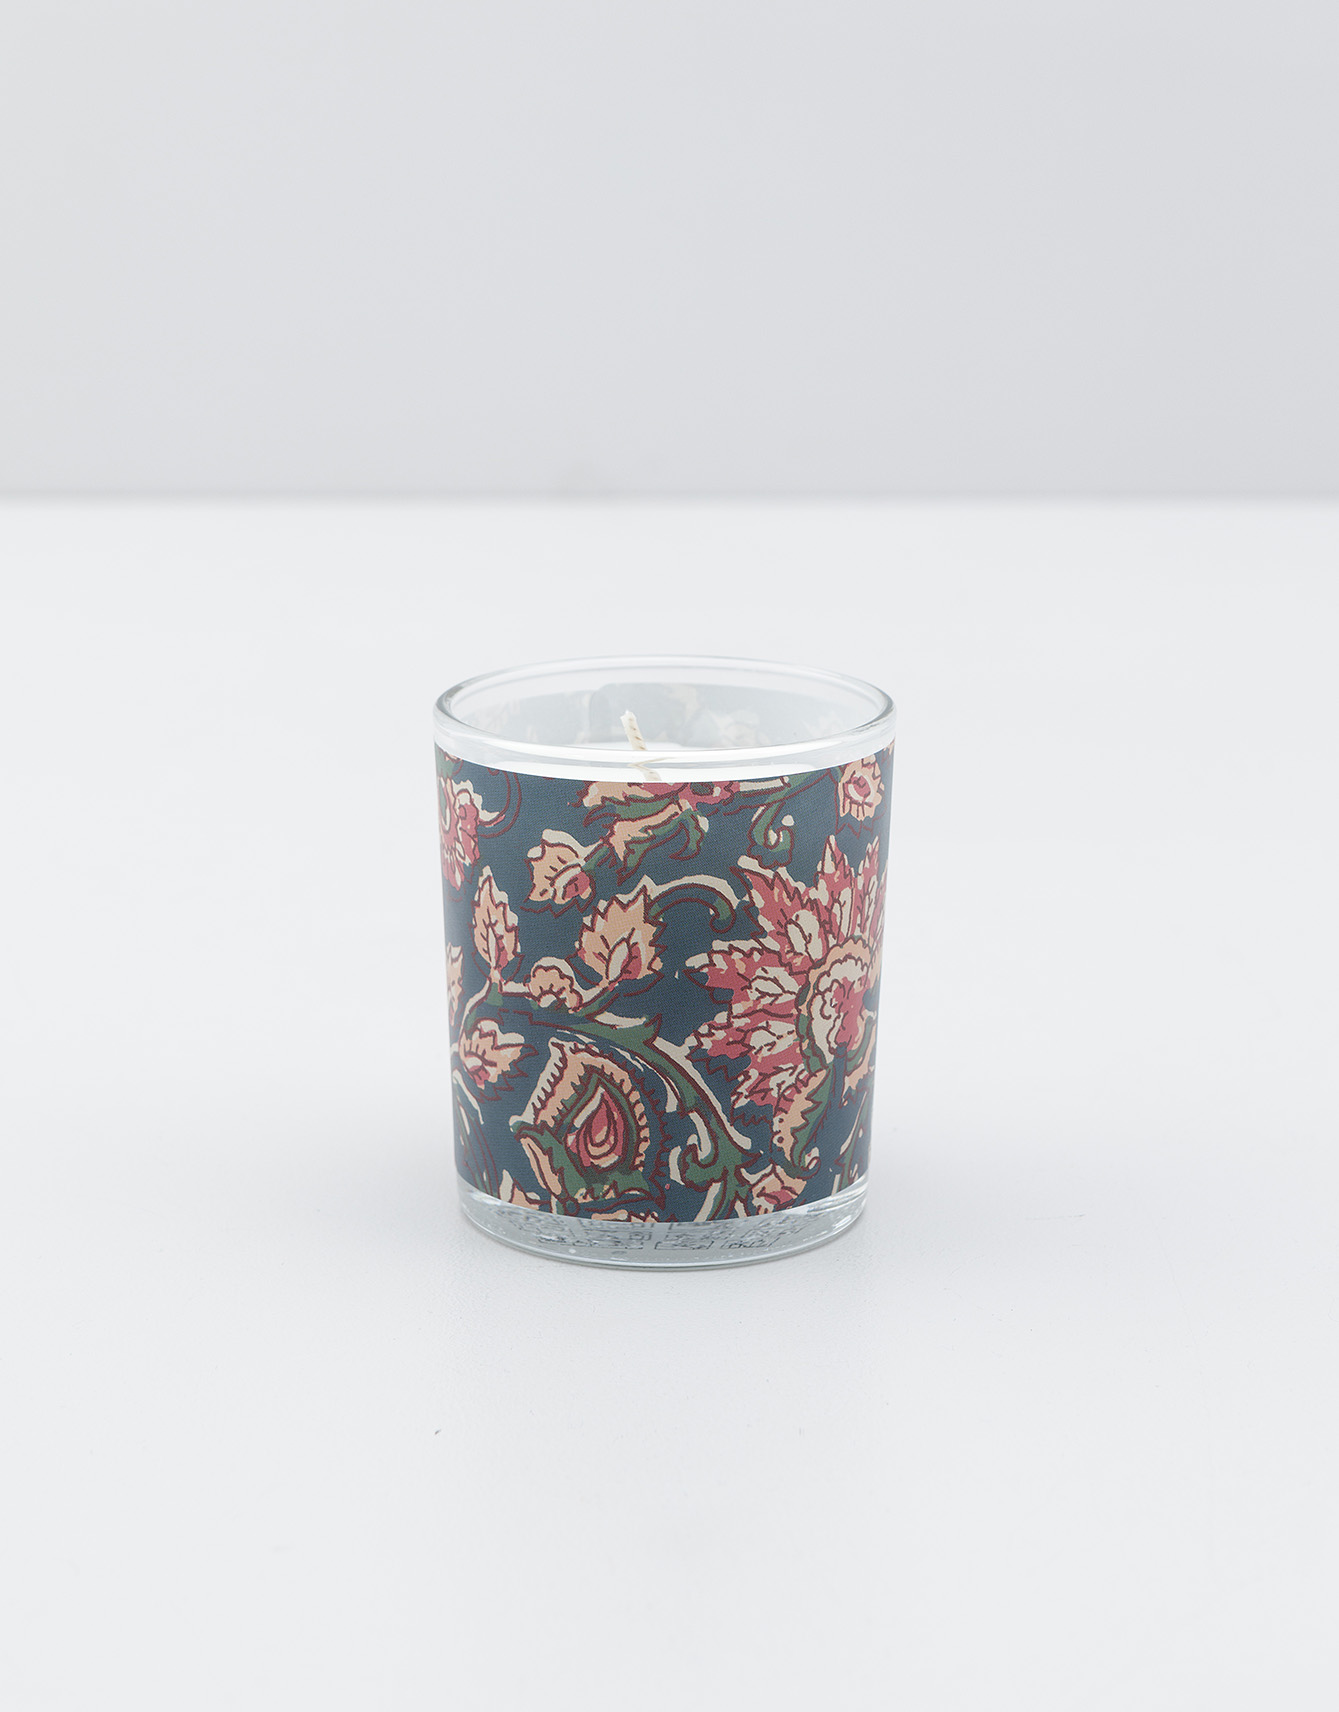 Scented candle Image 0